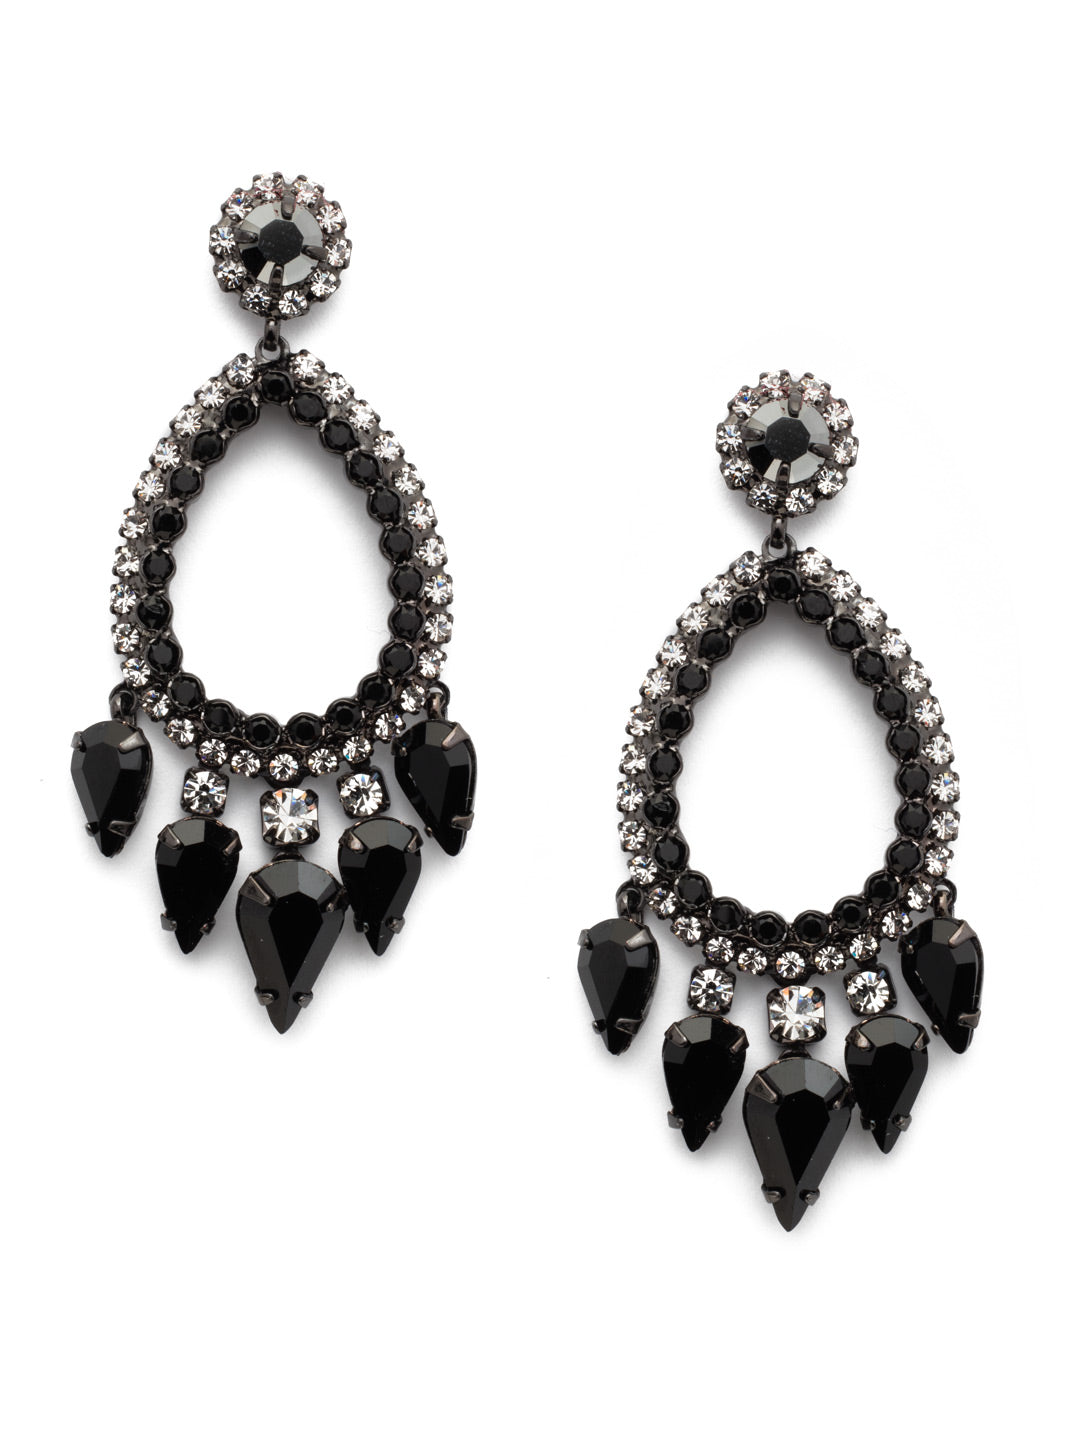 Outlined Teardrop Statement Earrings - ECU21GMMMO - From a floral inspired post hangs a delicate pear shaped outline of crystals. Small teardrop shaped crystals hang from the bottom creating a shimmering chandelier look. From Sorrelli's Midnight Moon collection in our Gun Metal finish.